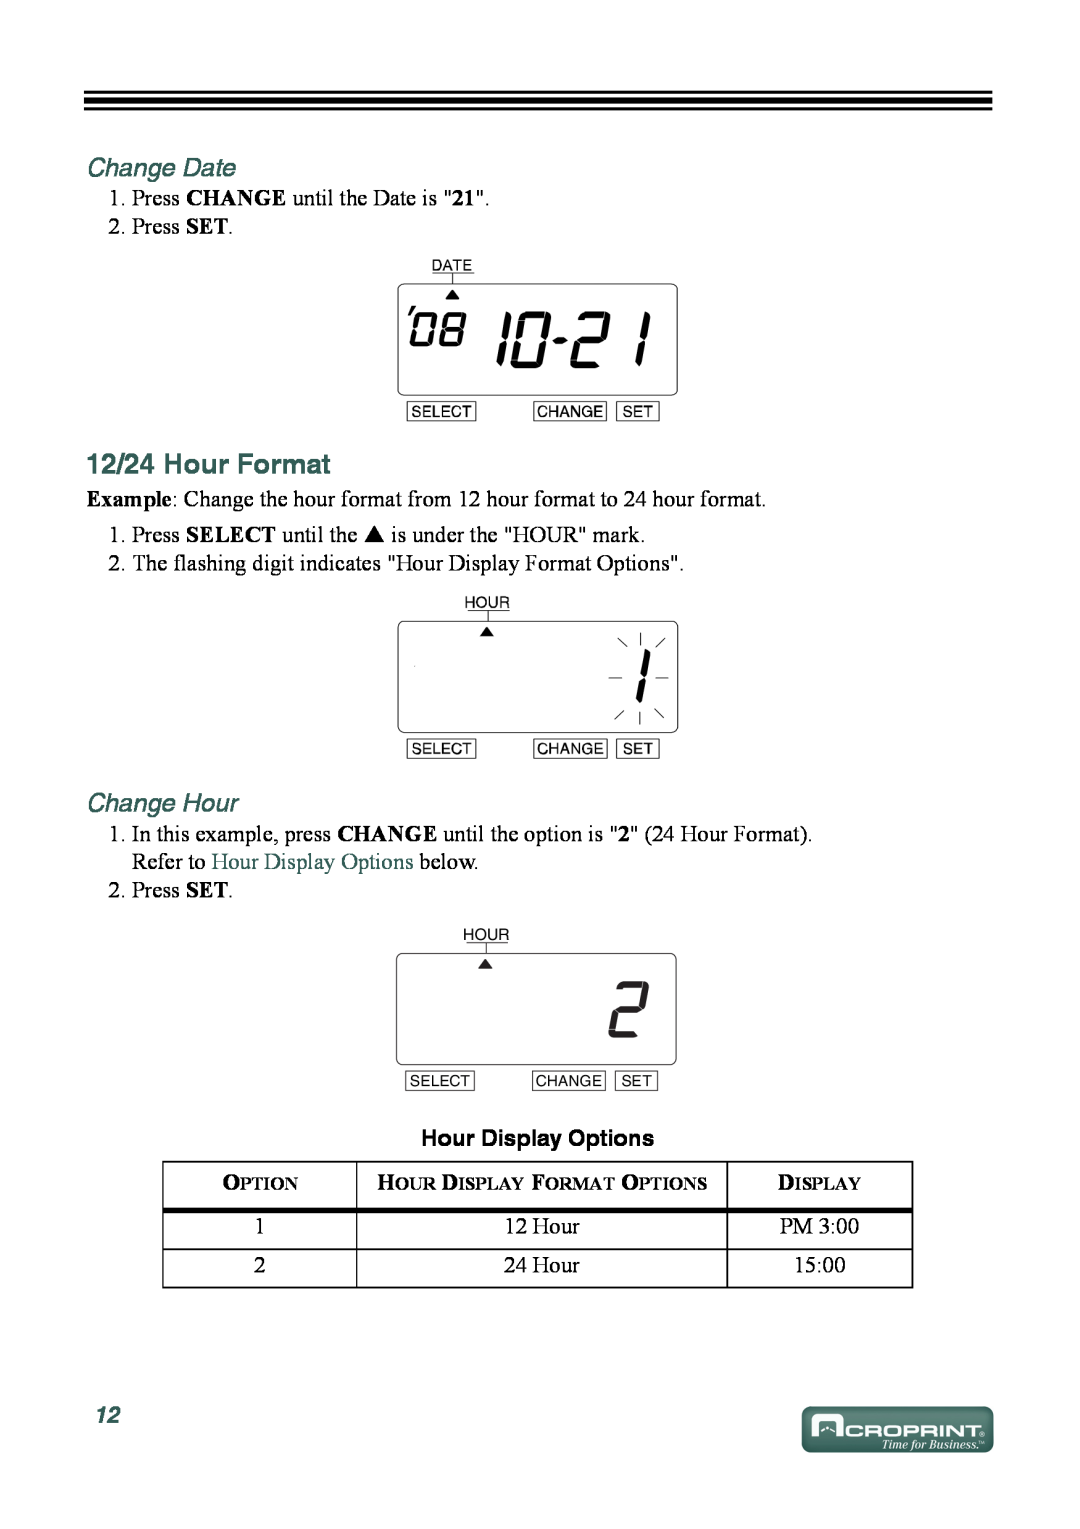 Acroprint ES700 user manual 12/24 Hour Format, Change Date, Change Hour, Hour Display Options 